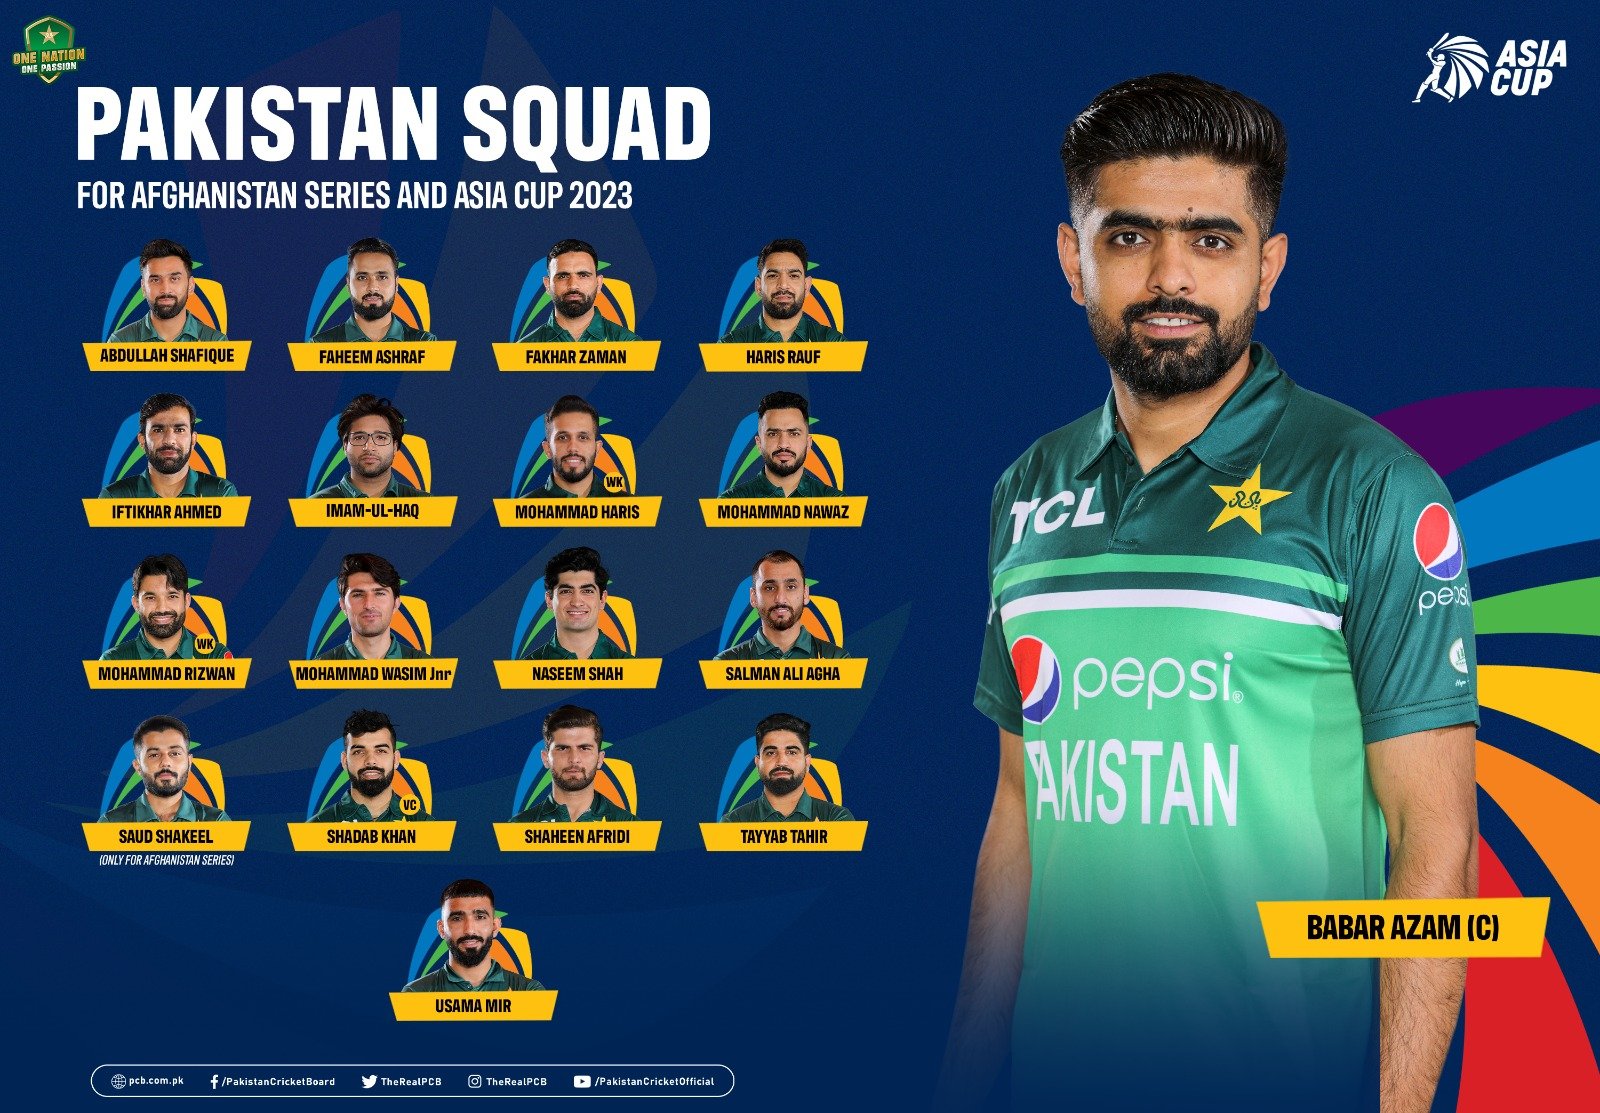 Pakistan announce squads for Asia Cup and Afghanistan series Press